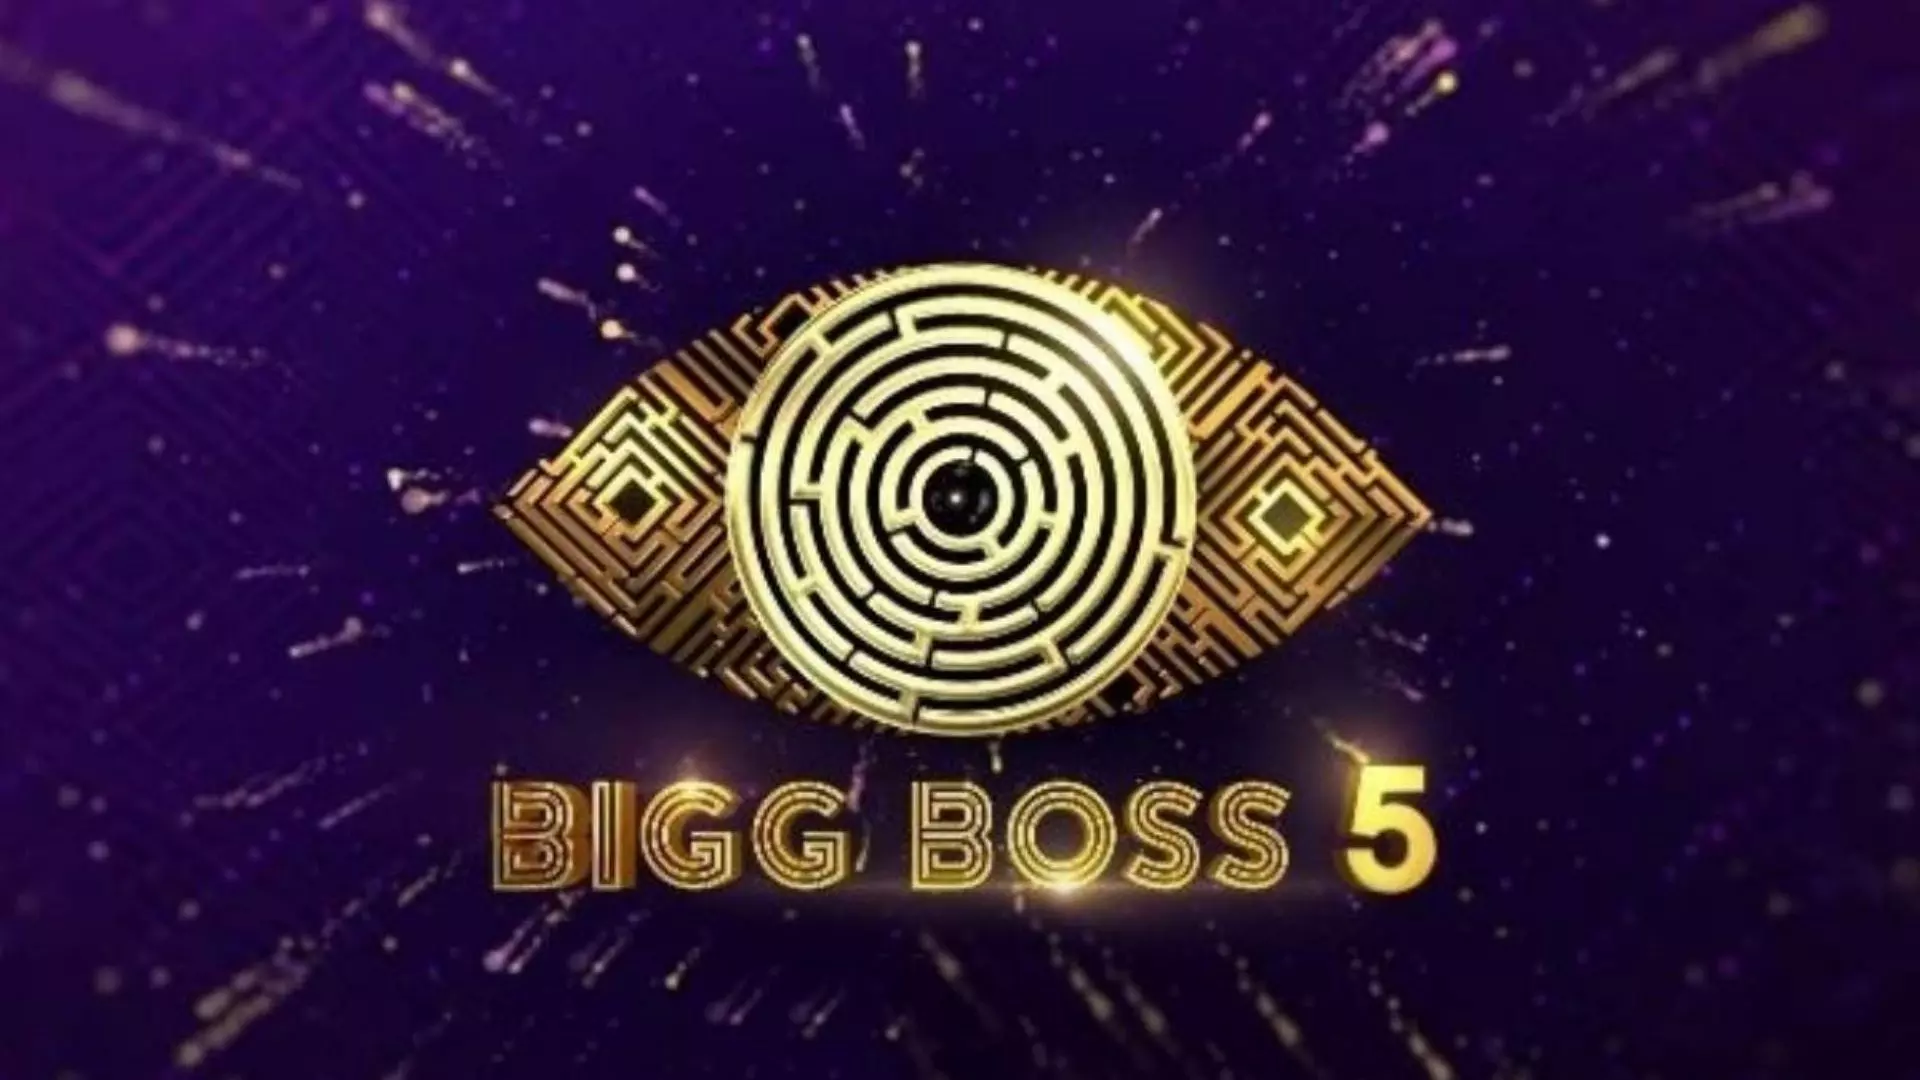 Bigg Boss 5 Season Starts From 5th September And Contestants Quarantine From 22nd August  2021